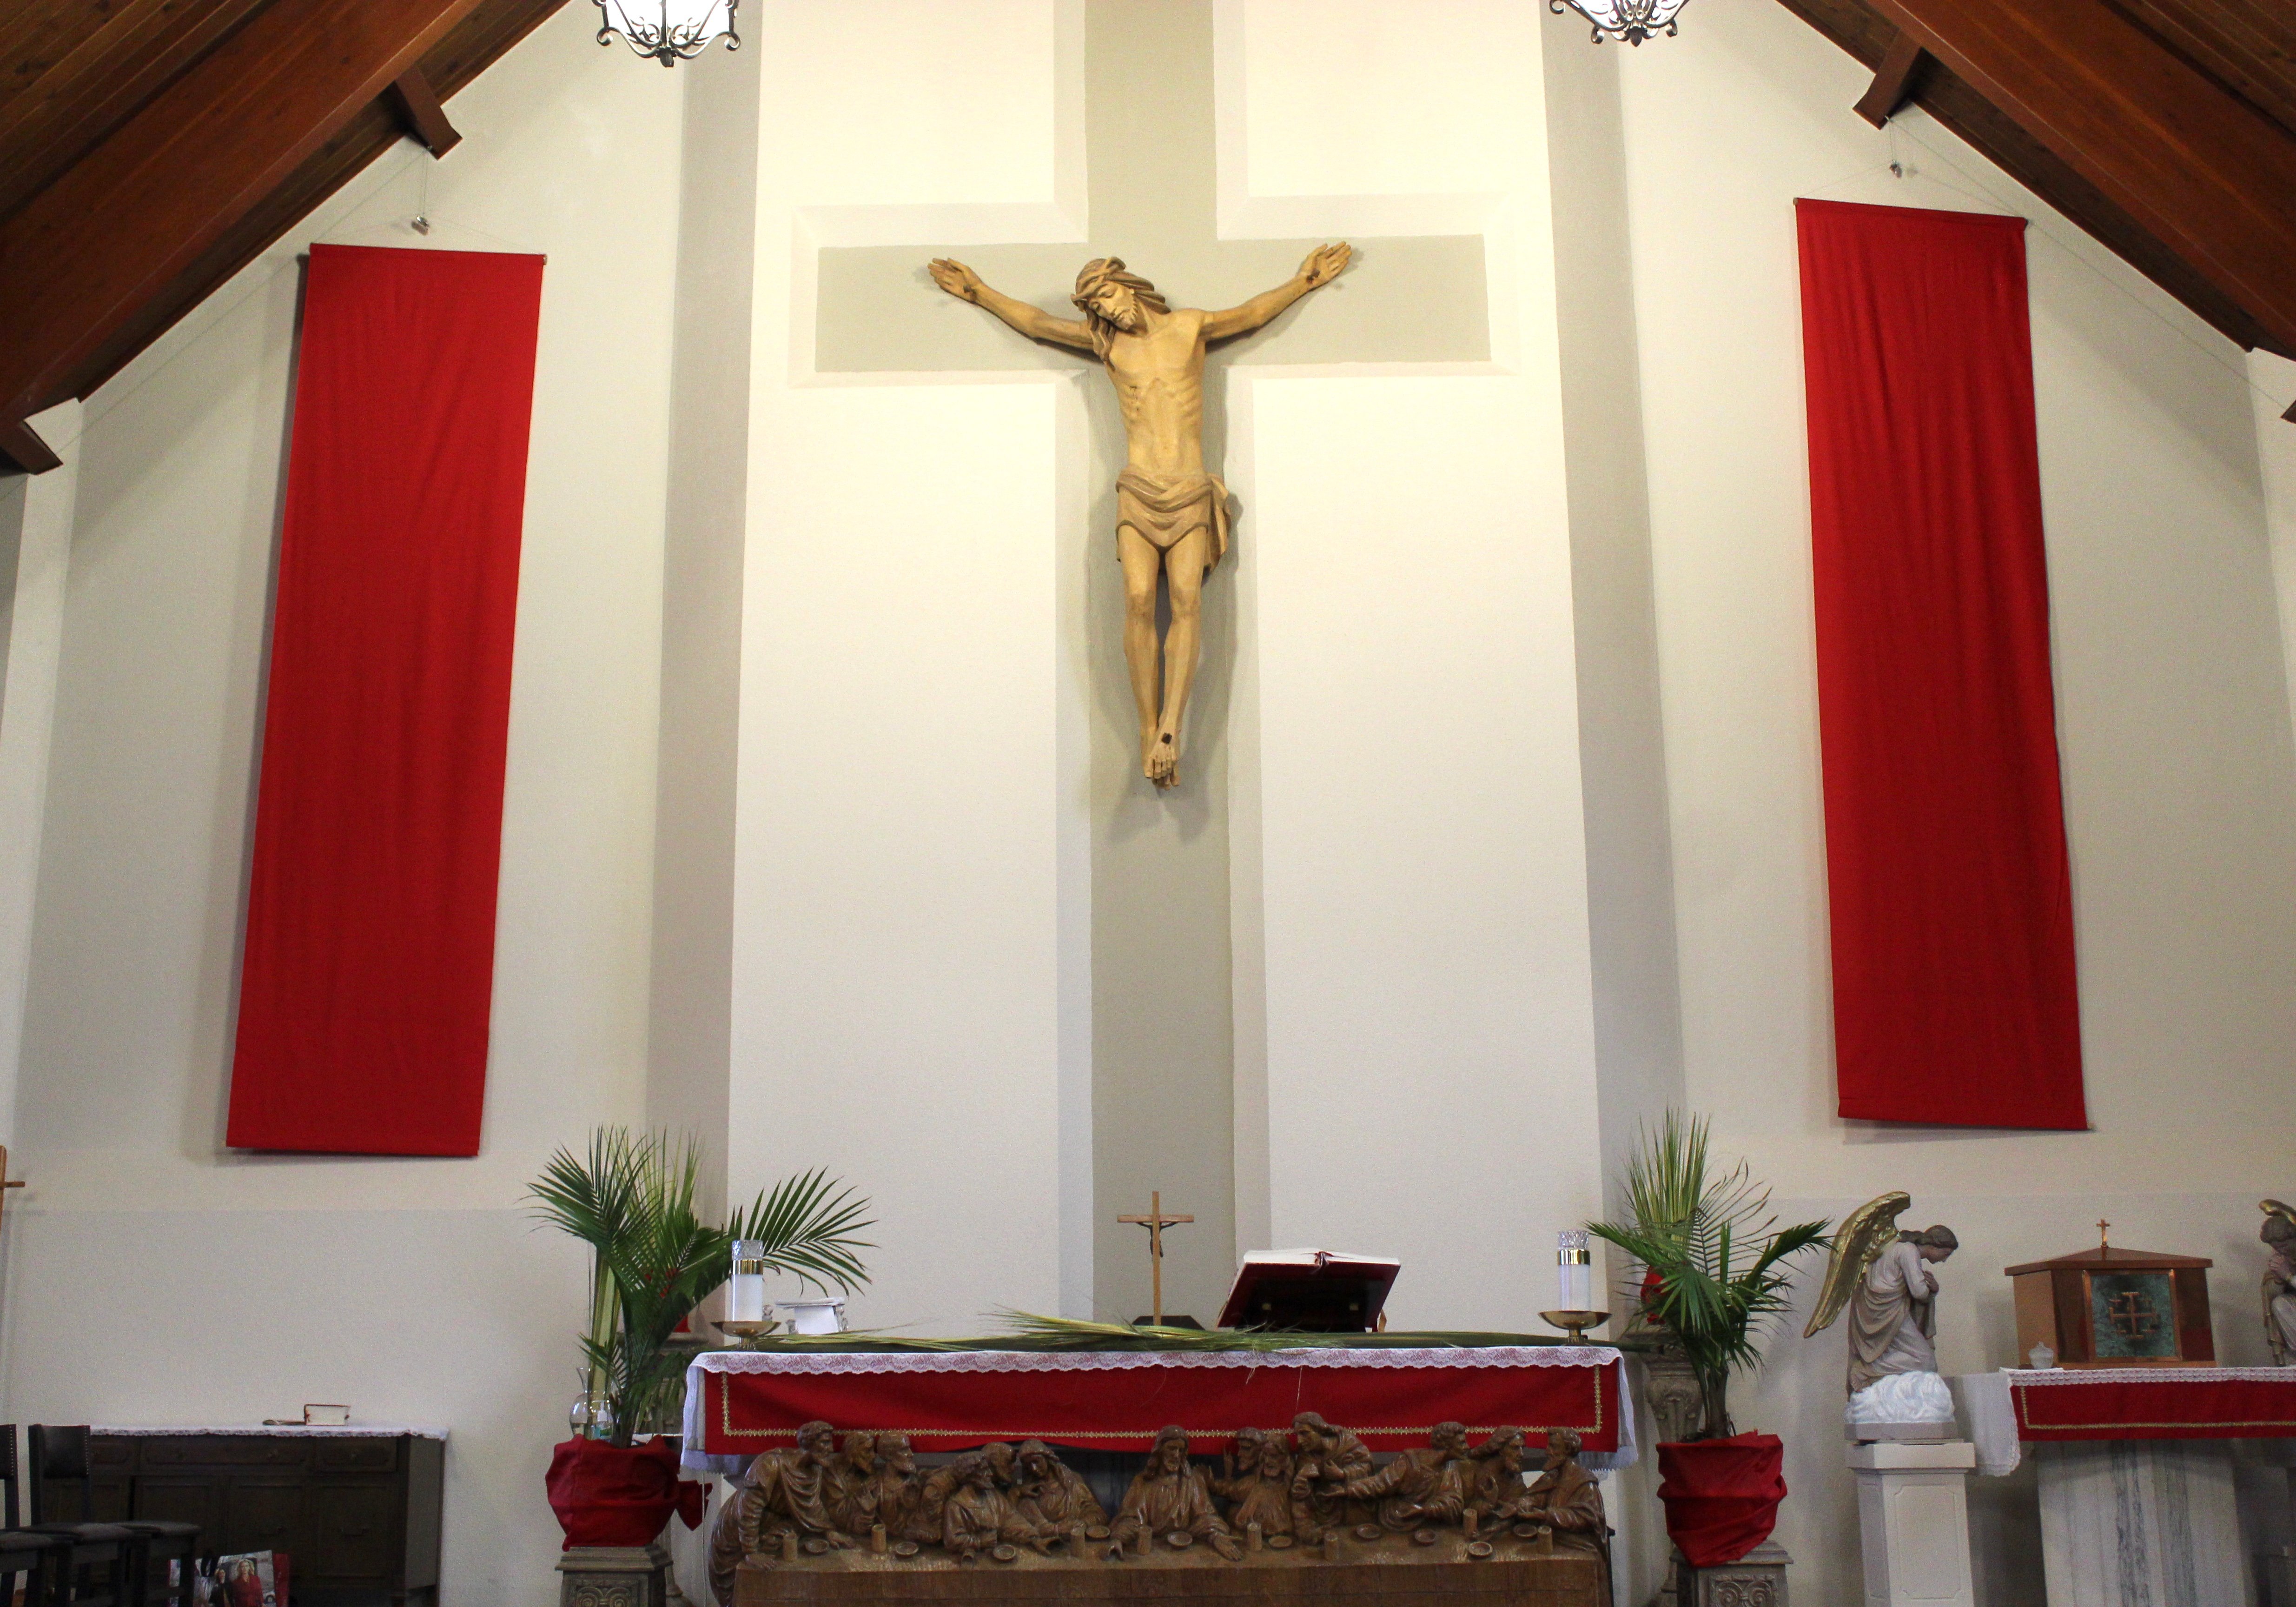 St. Jude's altar set for Palm Sunday with red altar clothes adorning the sanctuary